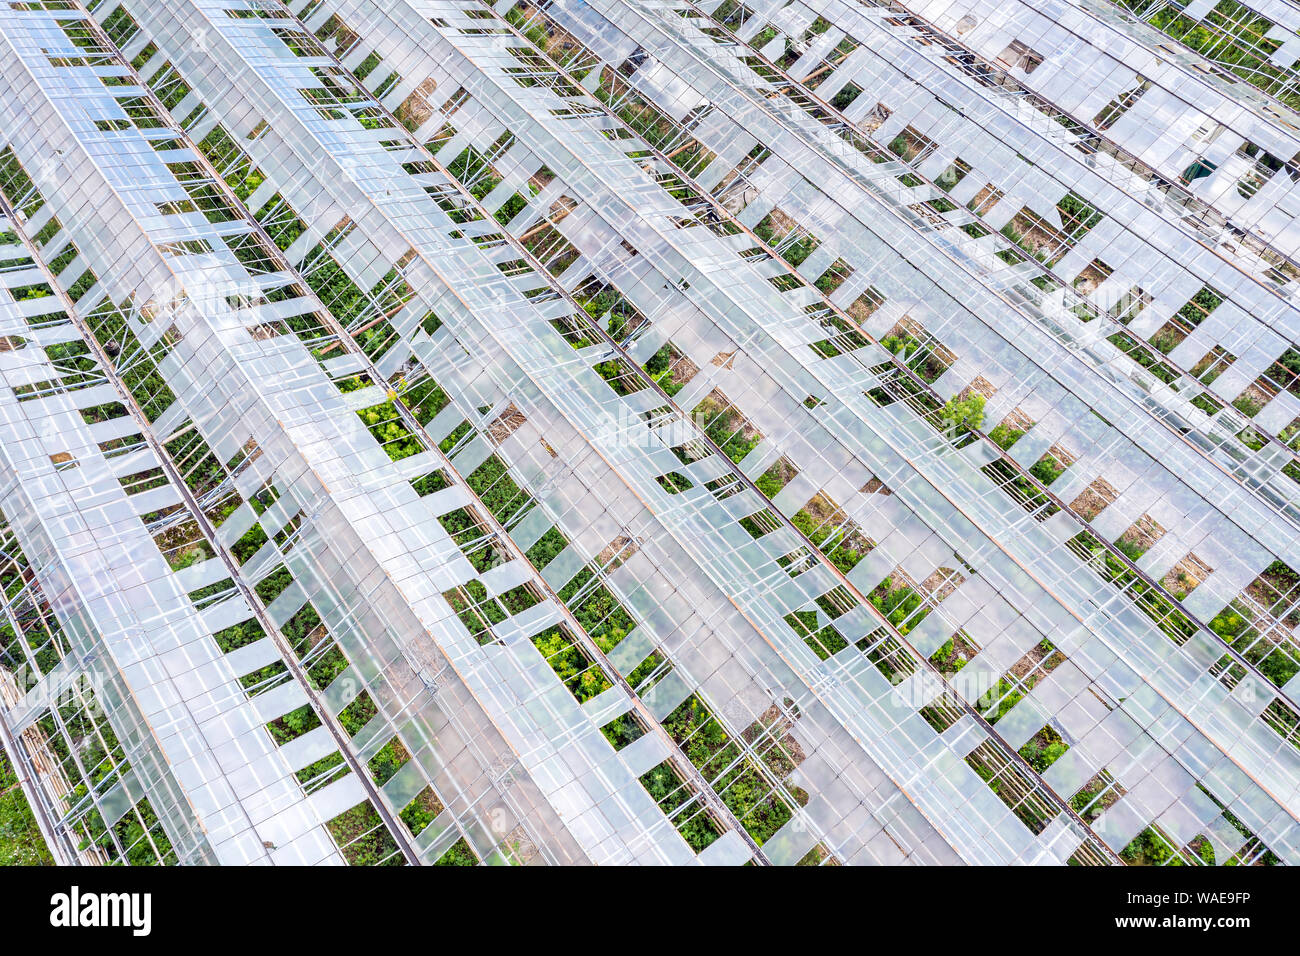 broken abandoned hothouse with holes in glass roof. aerial view Stock Photo